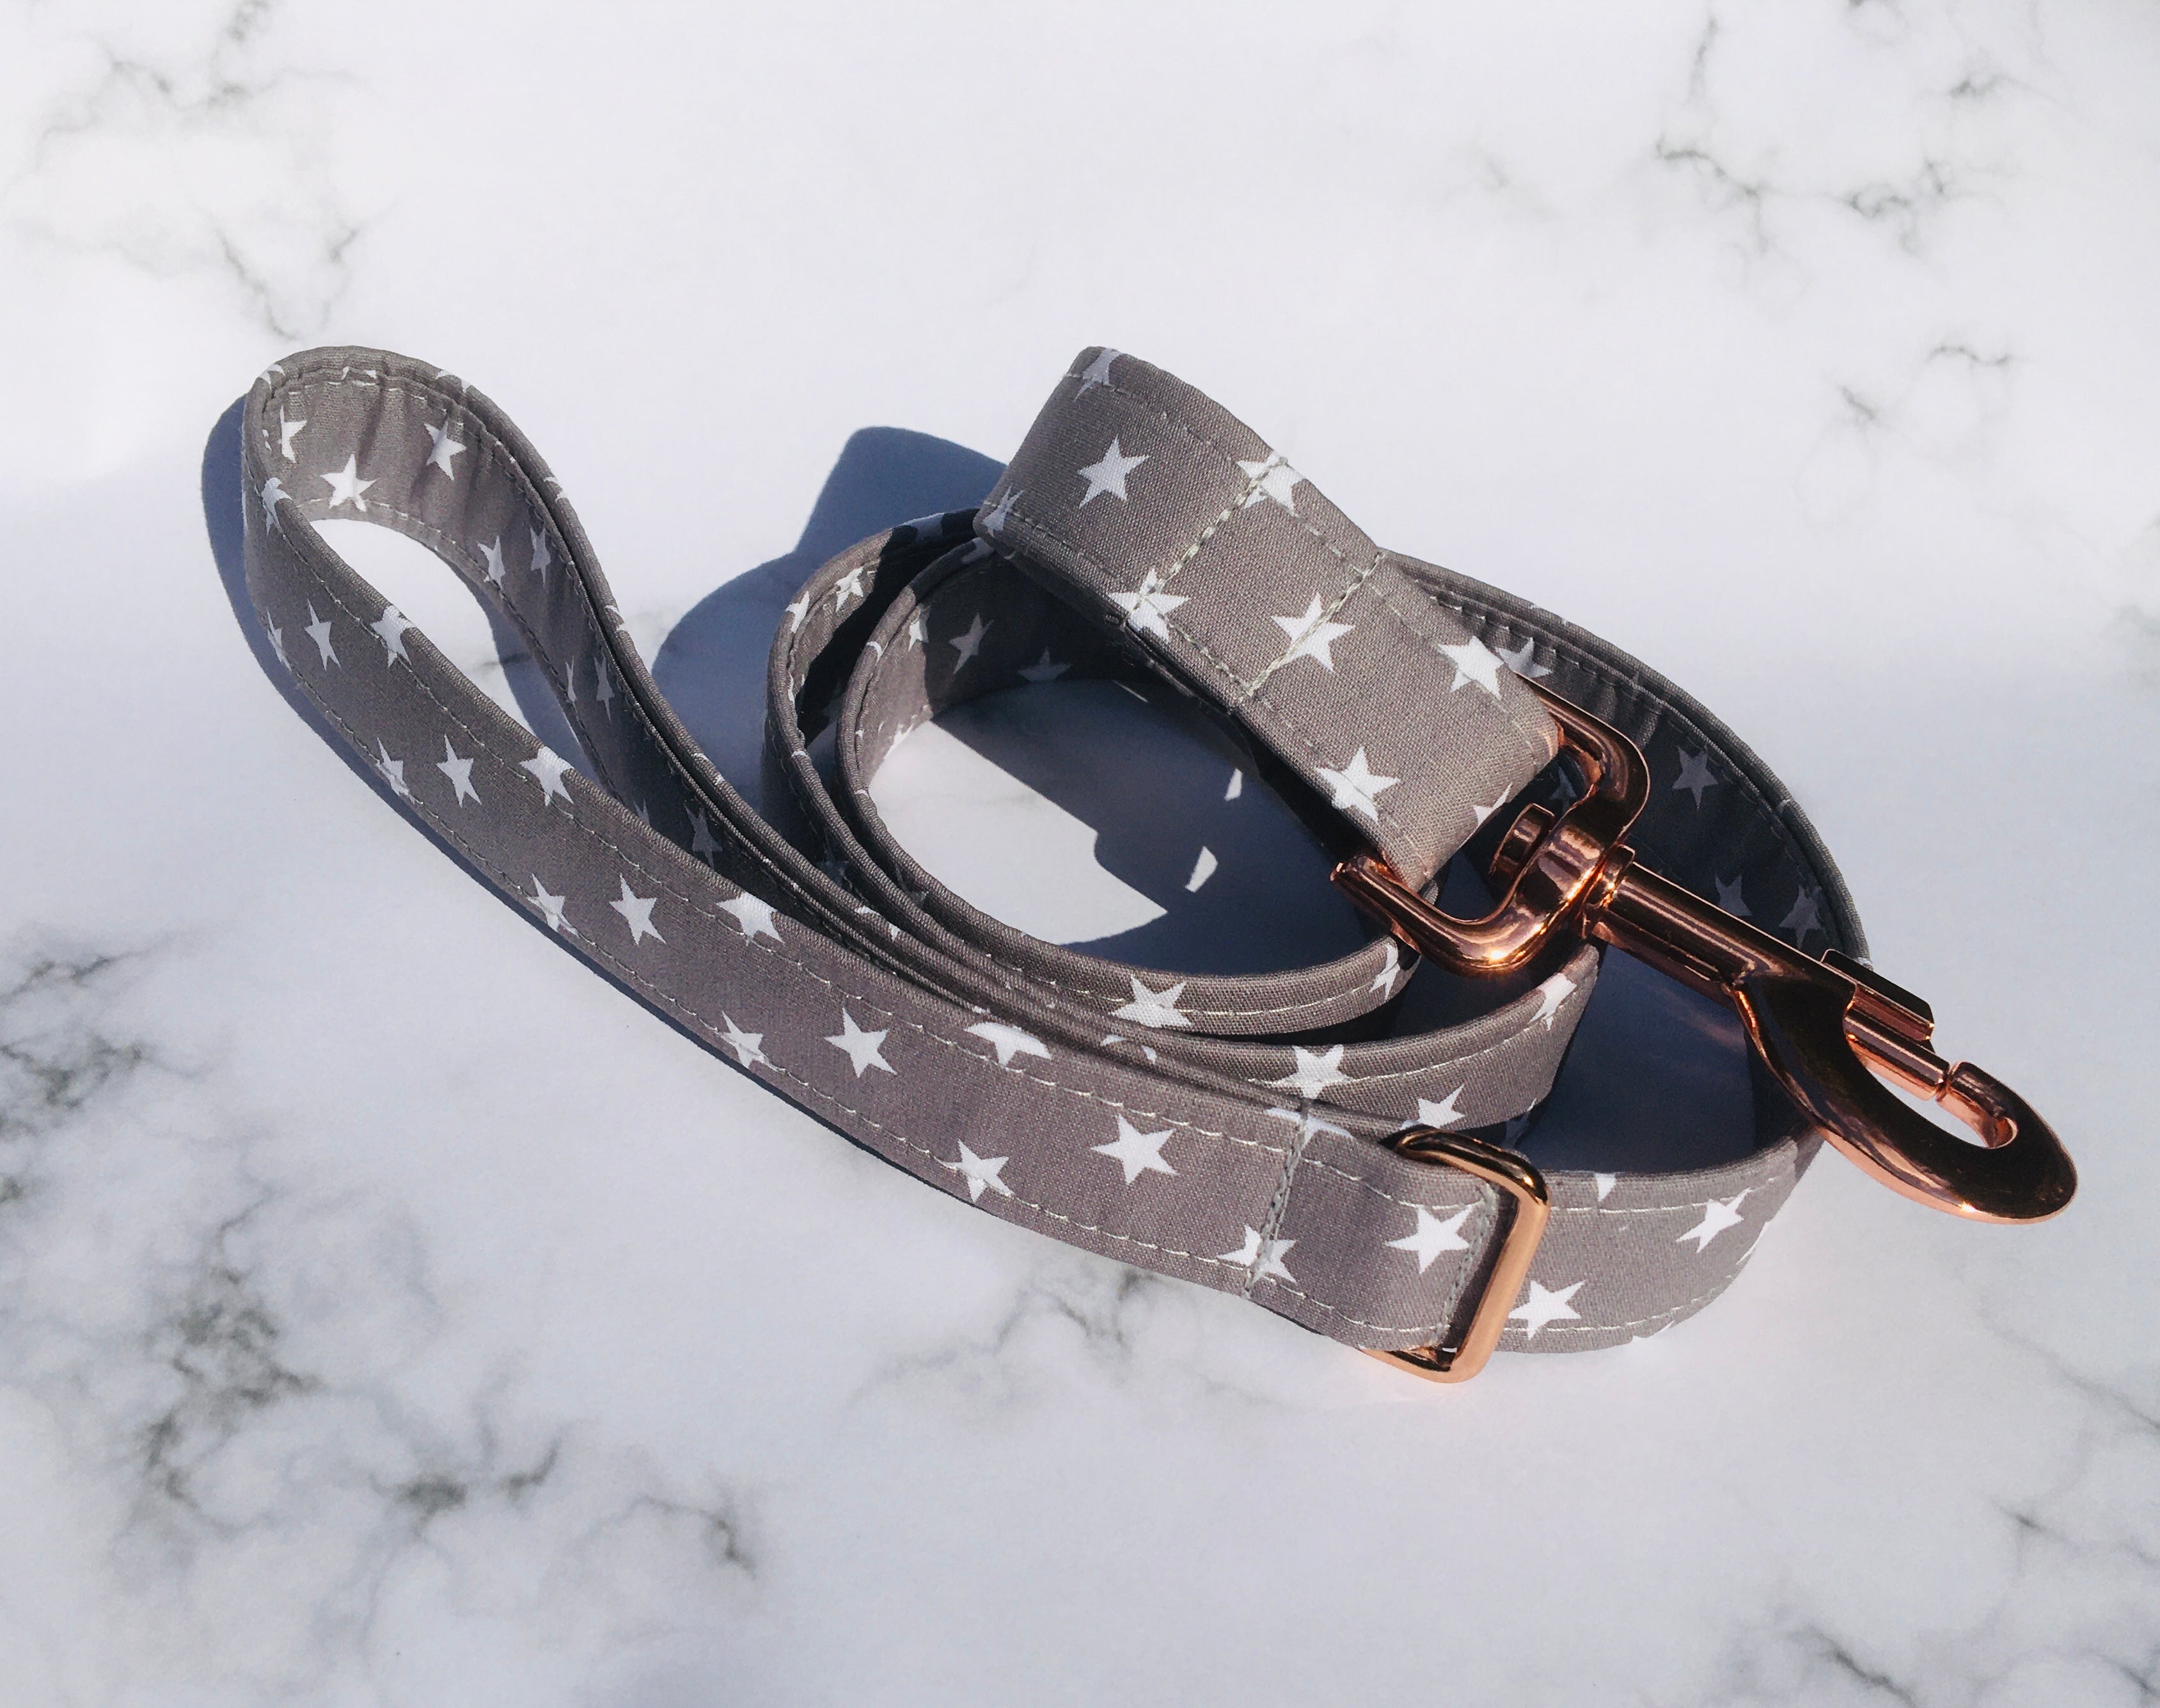 "Super-Star" Print Fabric Covered Collar and Lead Set